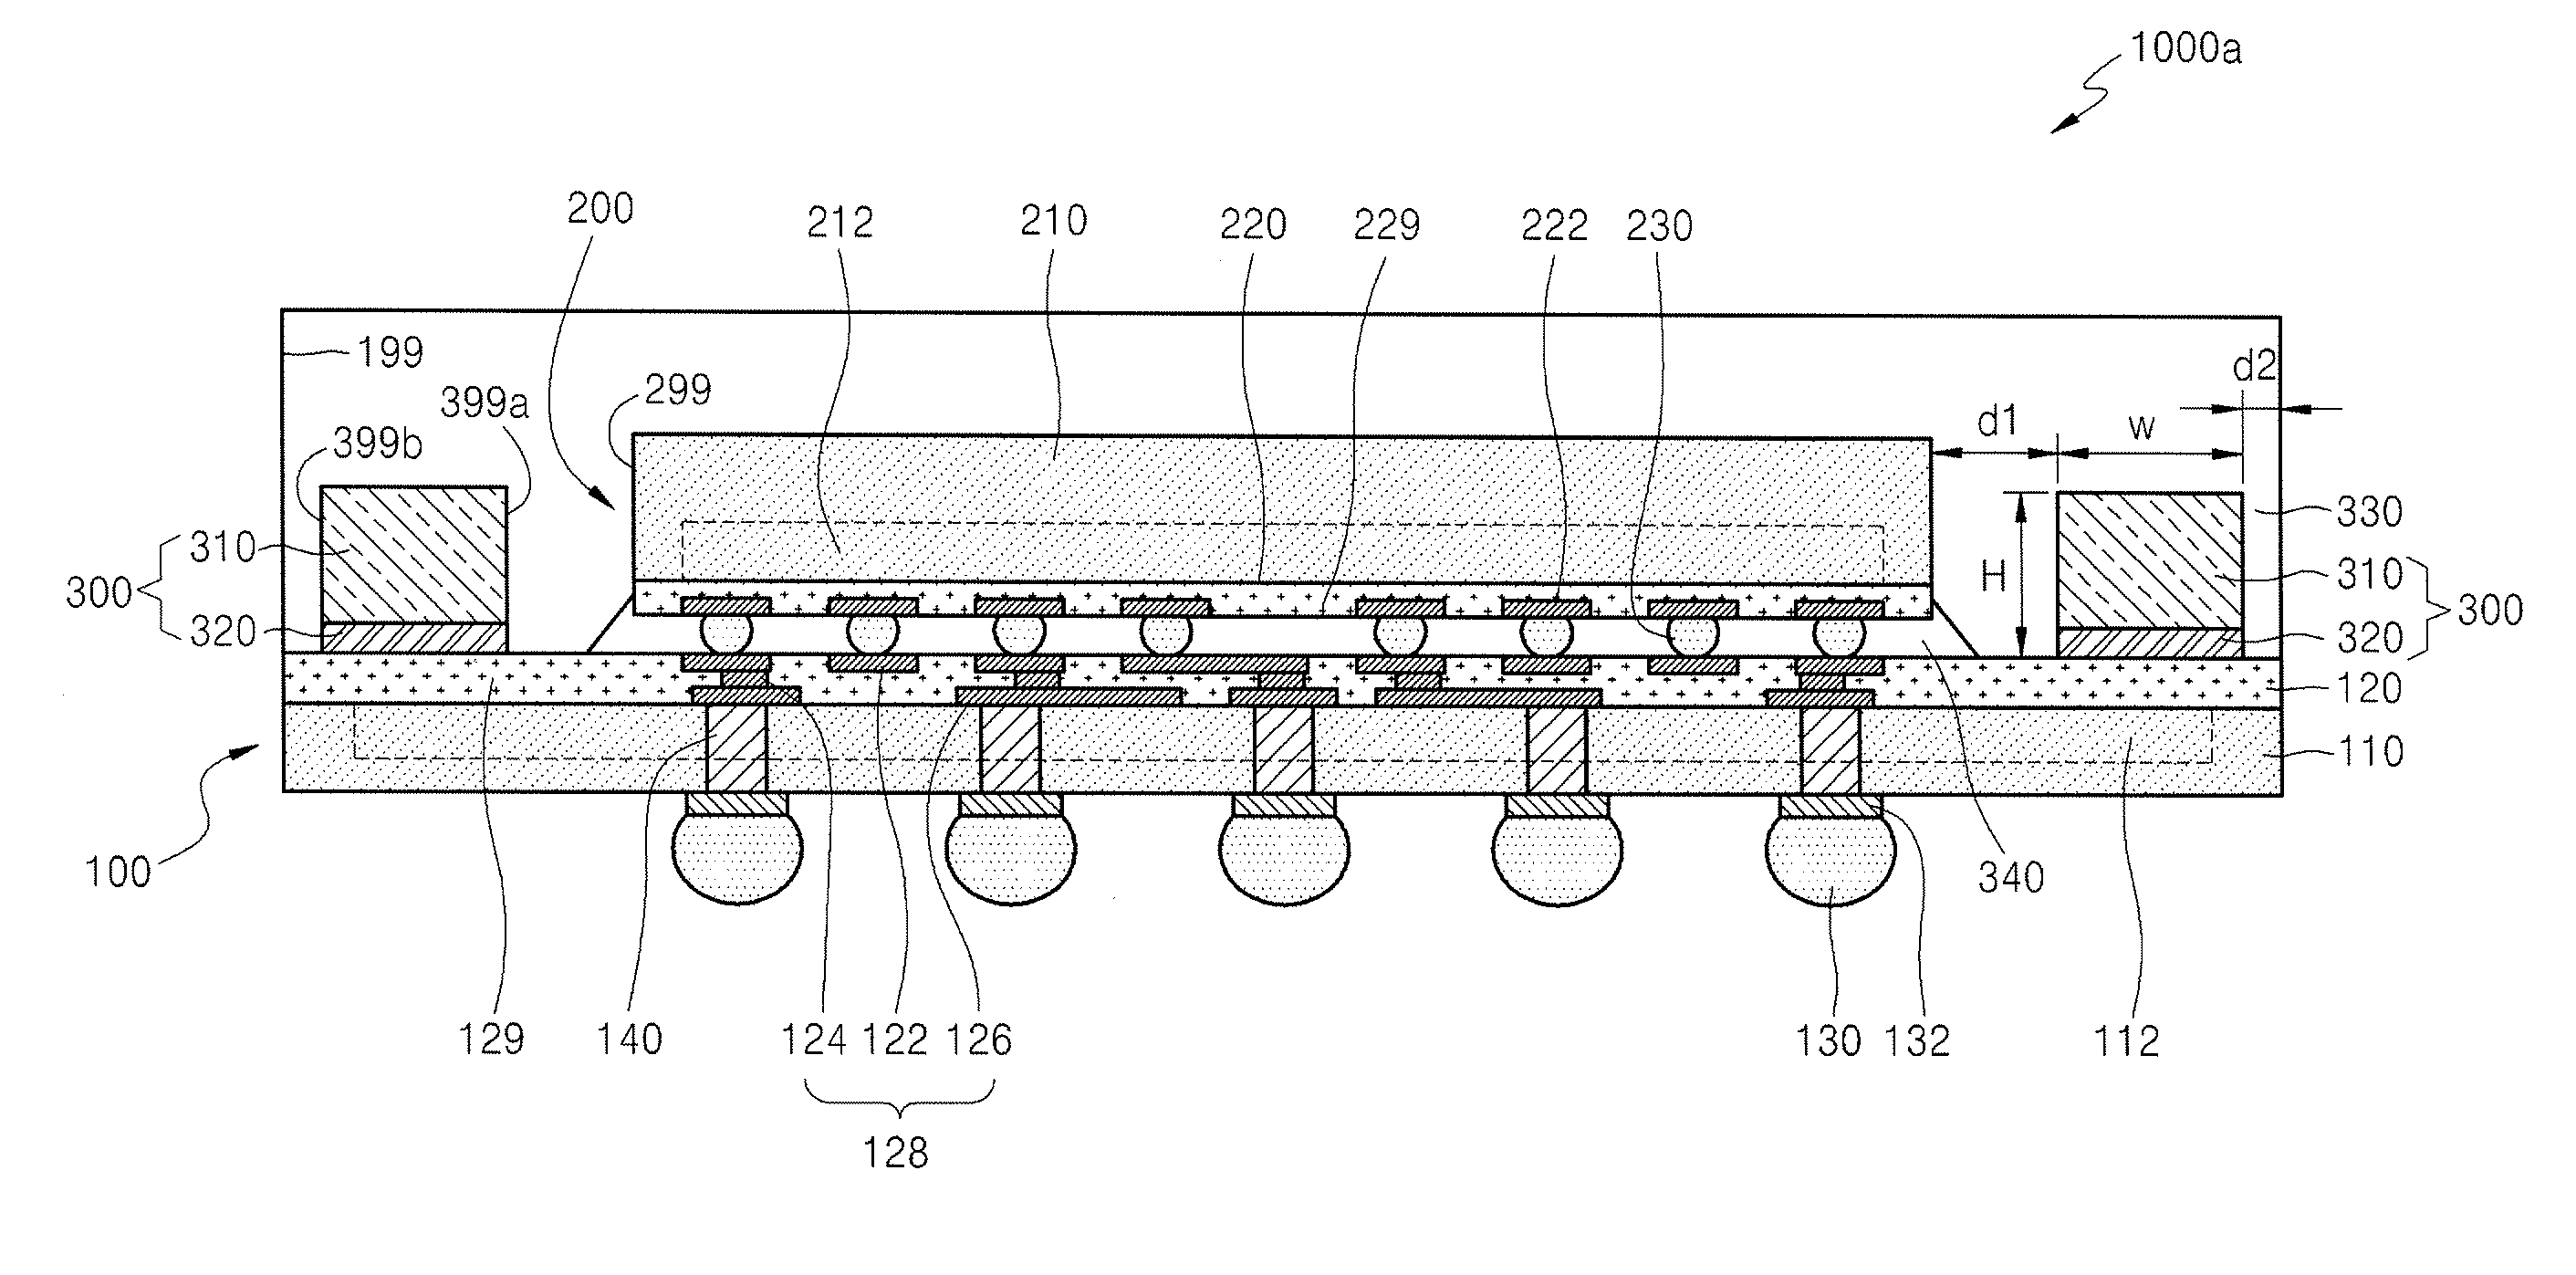 Stack package and semiconductor package including the same